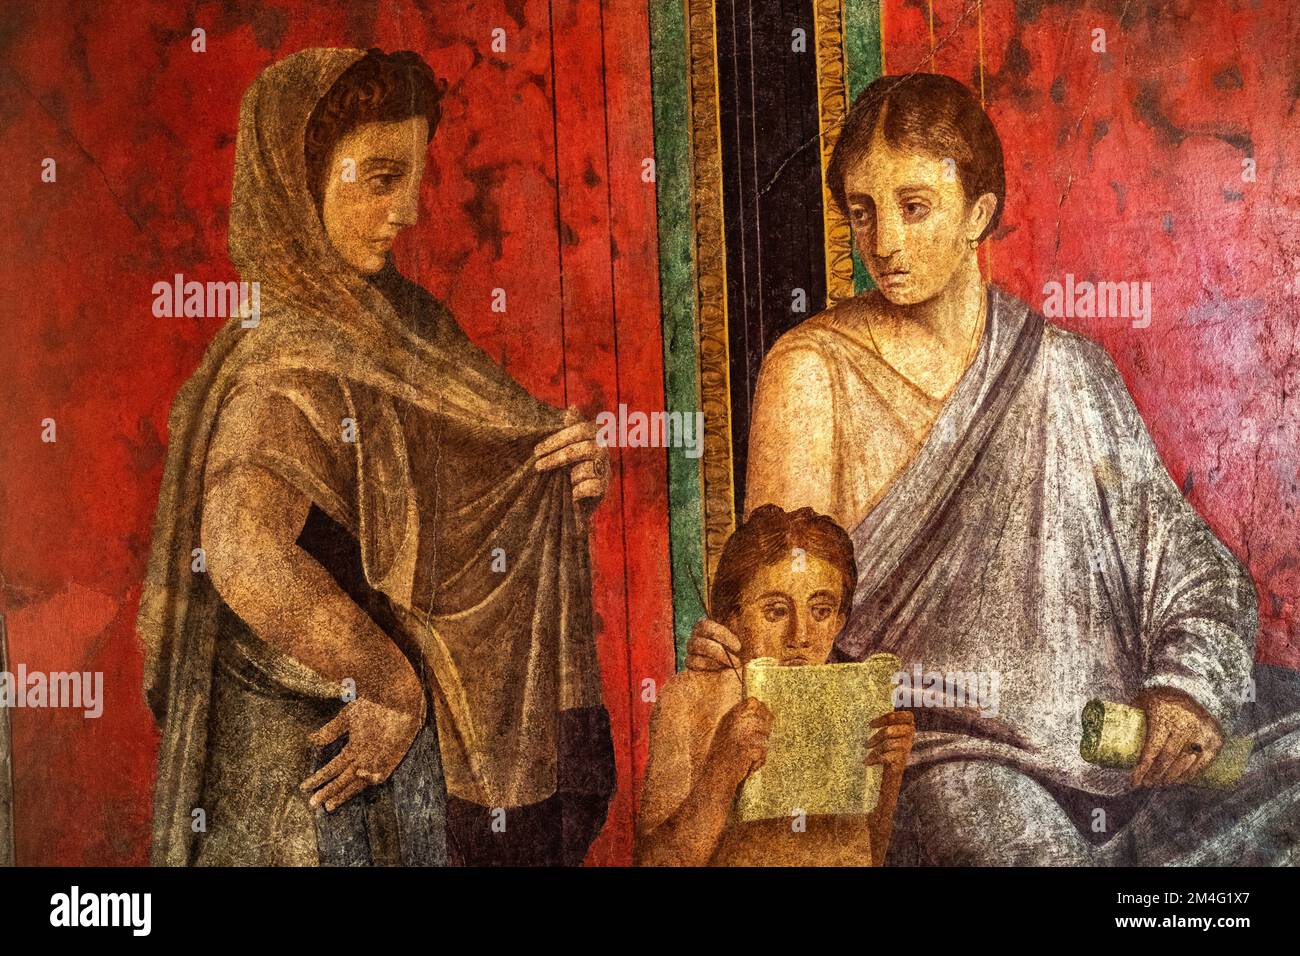 Ancient Roman fresco in Pompeii showing a detail of the mystery cult of Dionysus Stock Photo